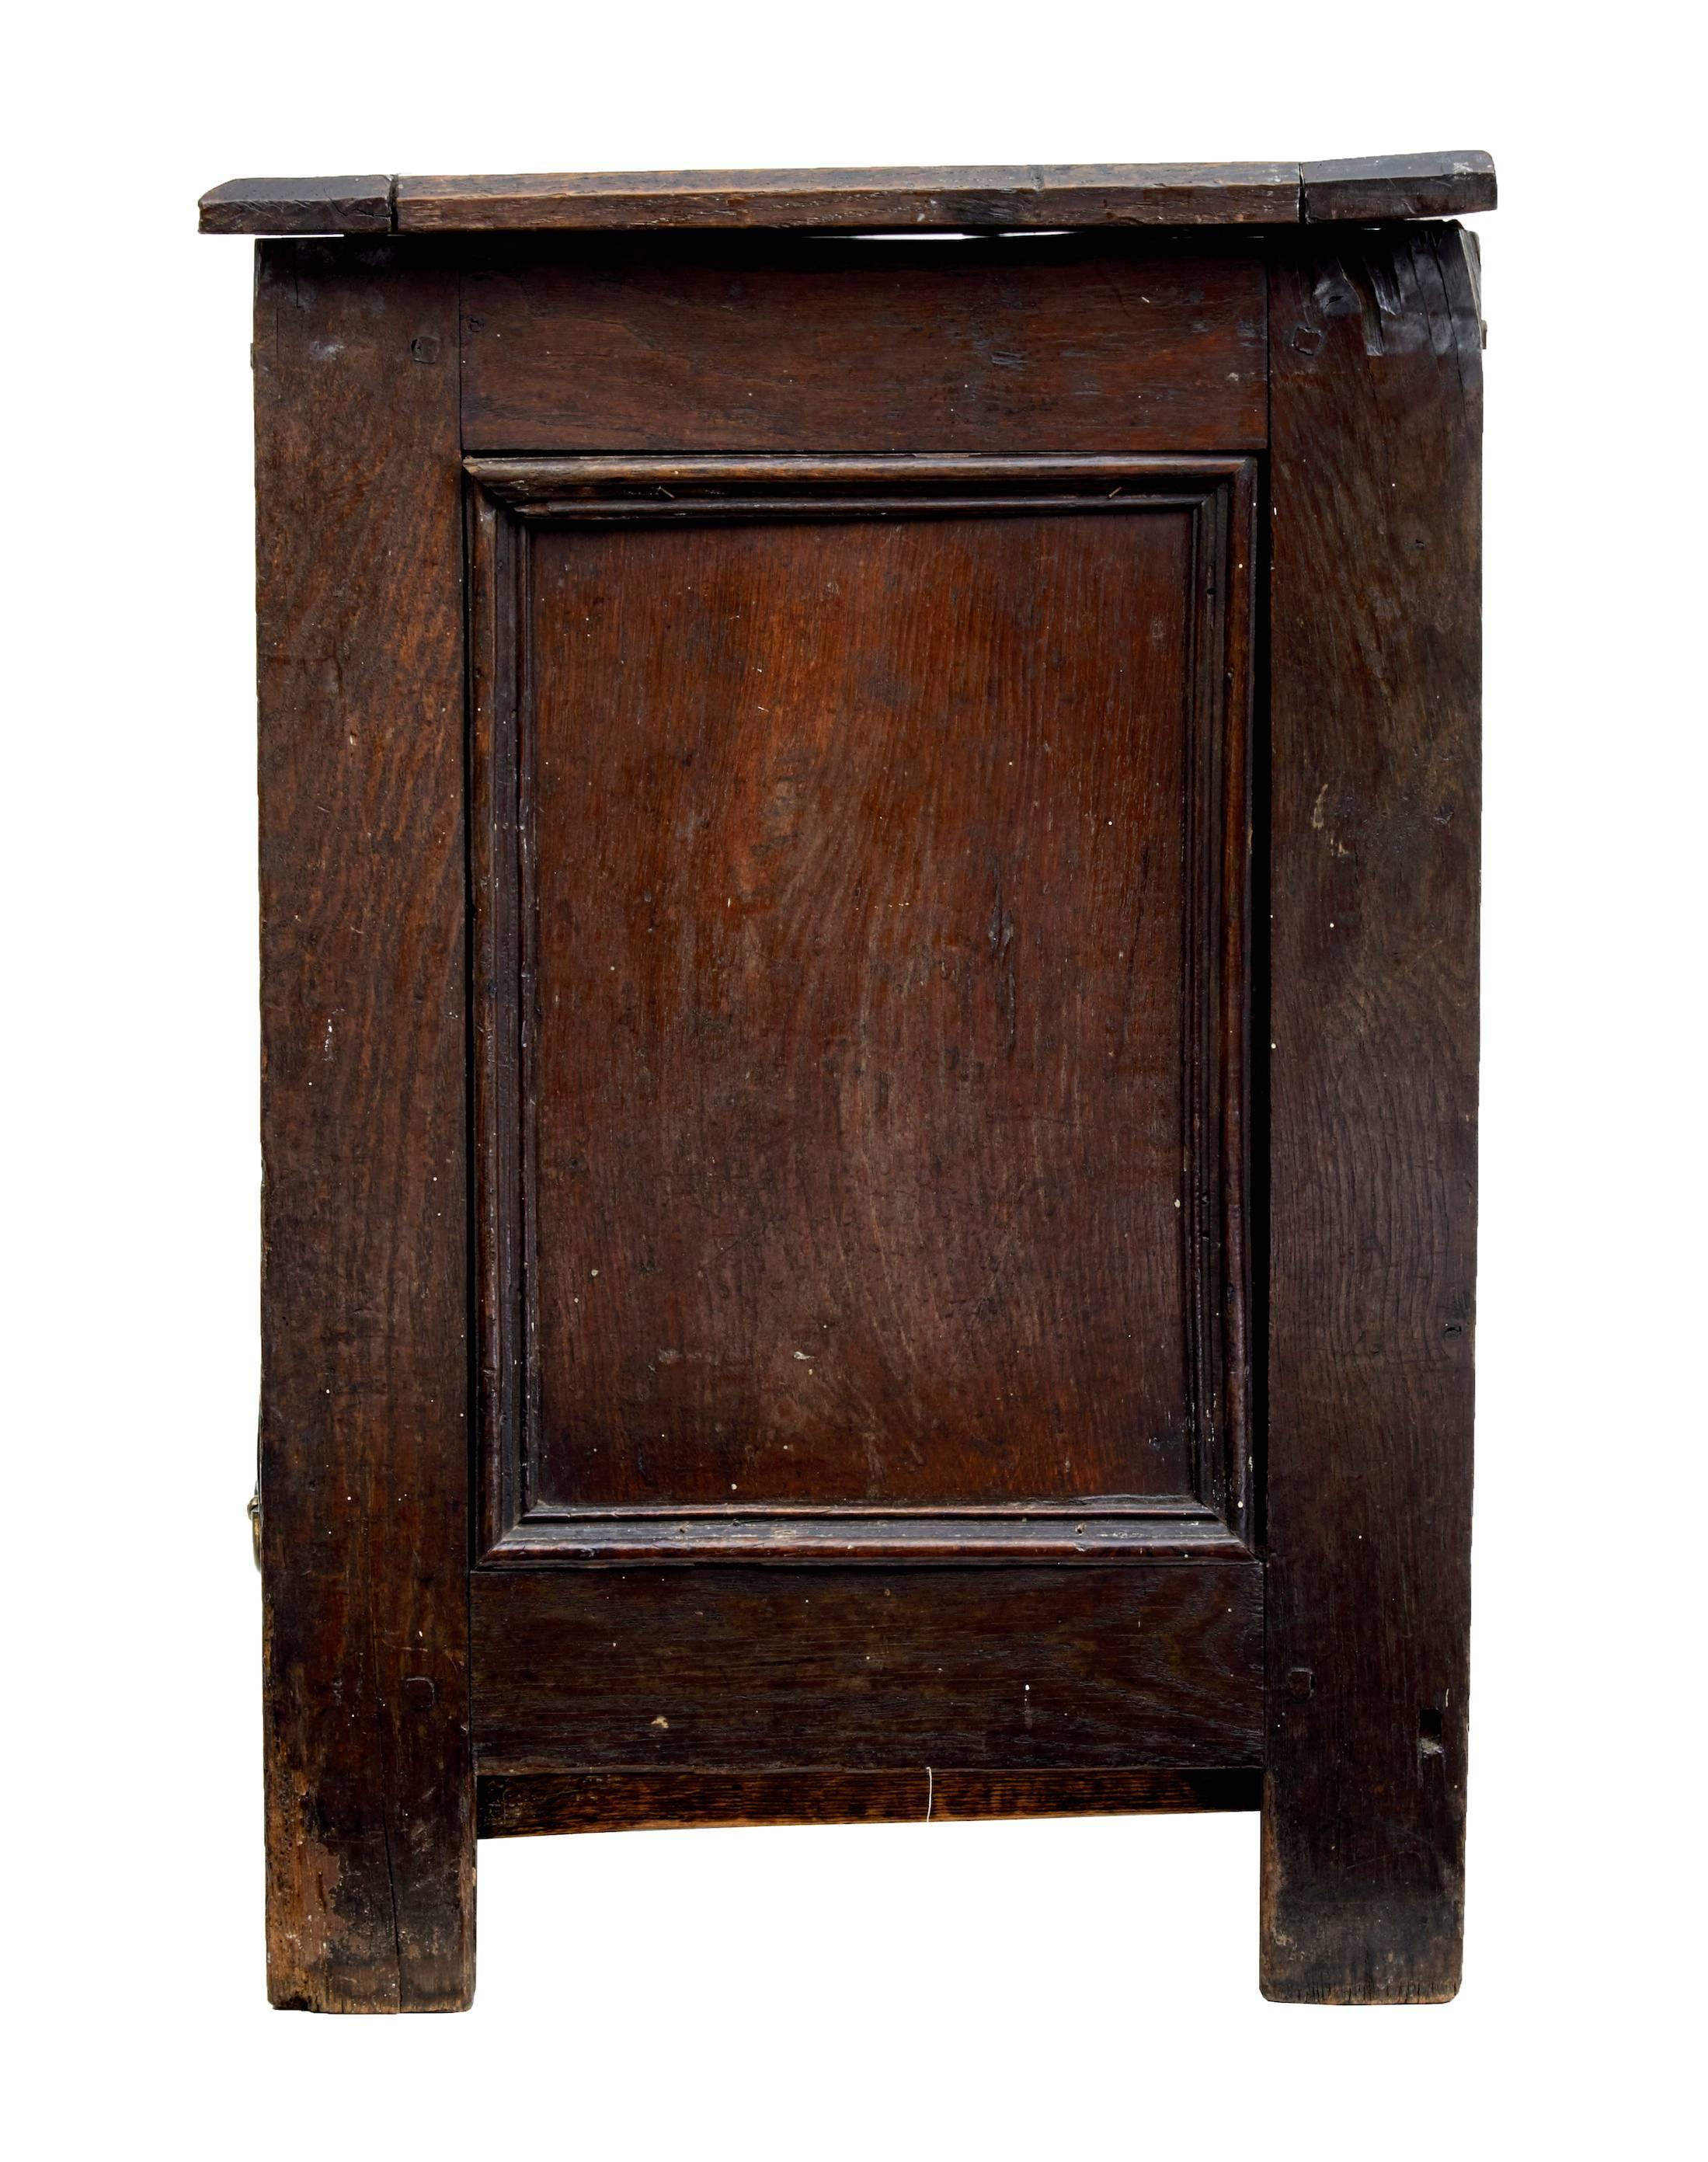 Gothic Late 17th Century Small Oak Mule Chest